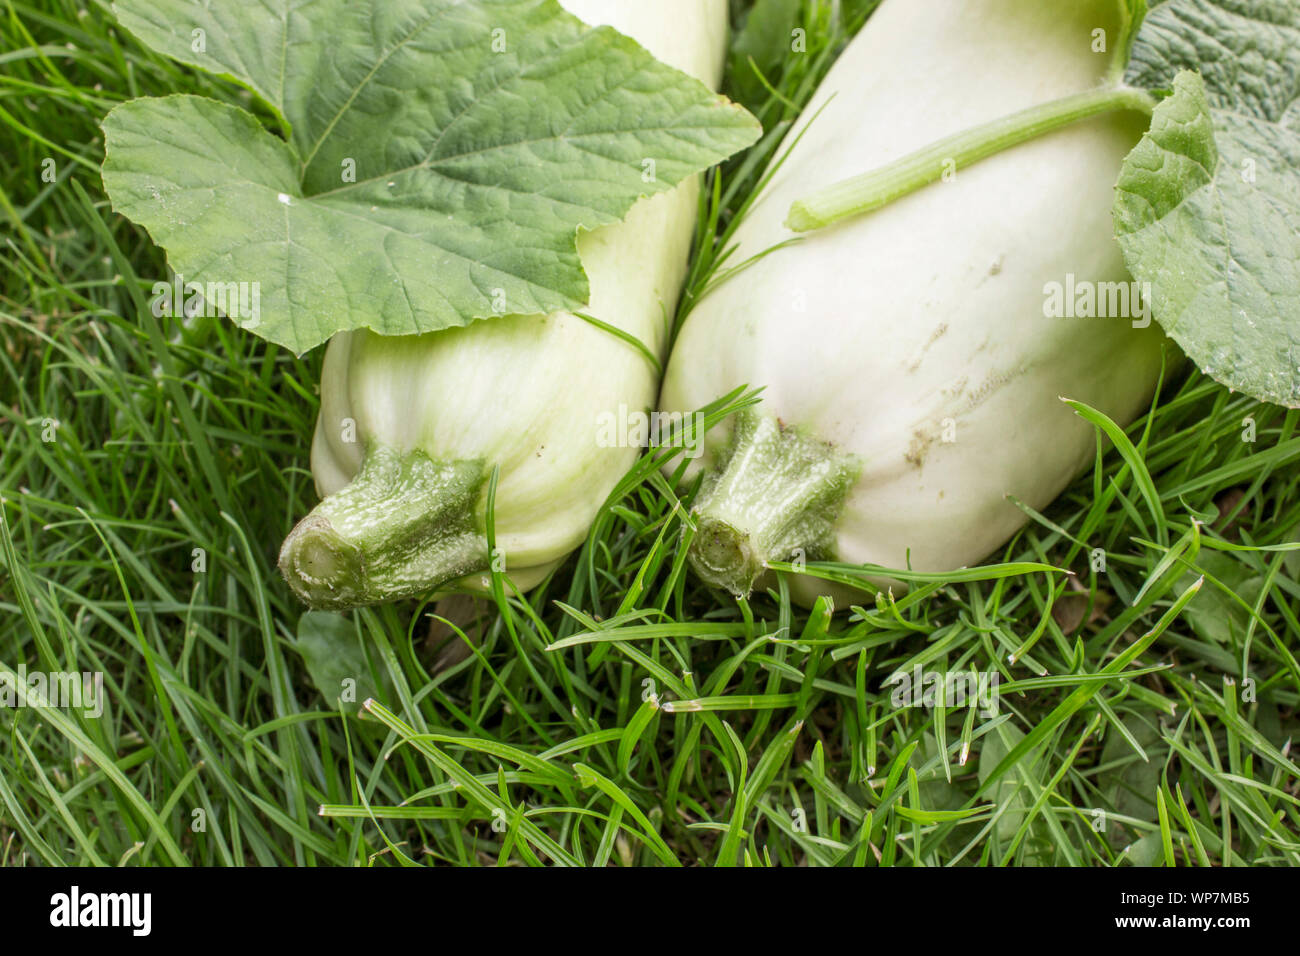 Two ripe zucchini lie on the green grass. Close-up Stock Photo